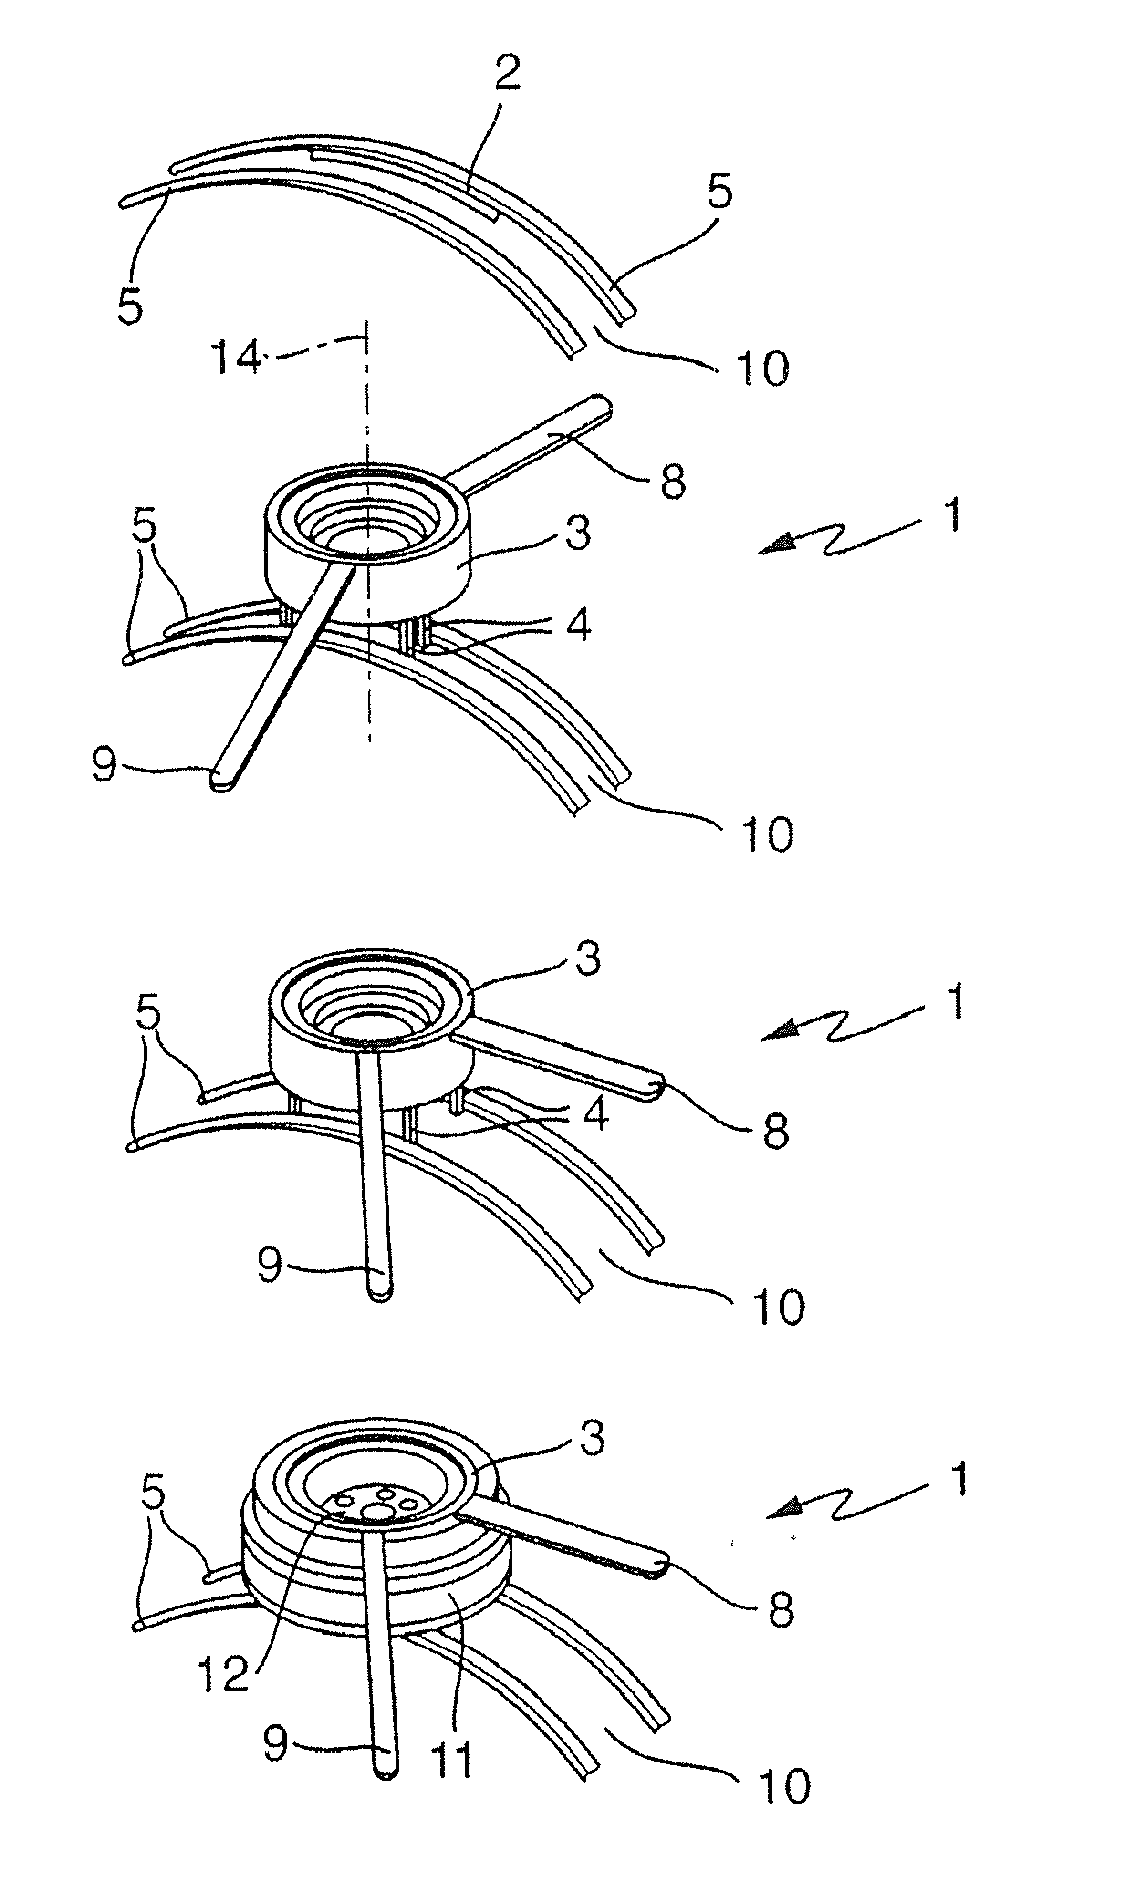 Device For Creating An Intercostal Transcutaneous Access To An, In Particular Endoscopic, Operating Field